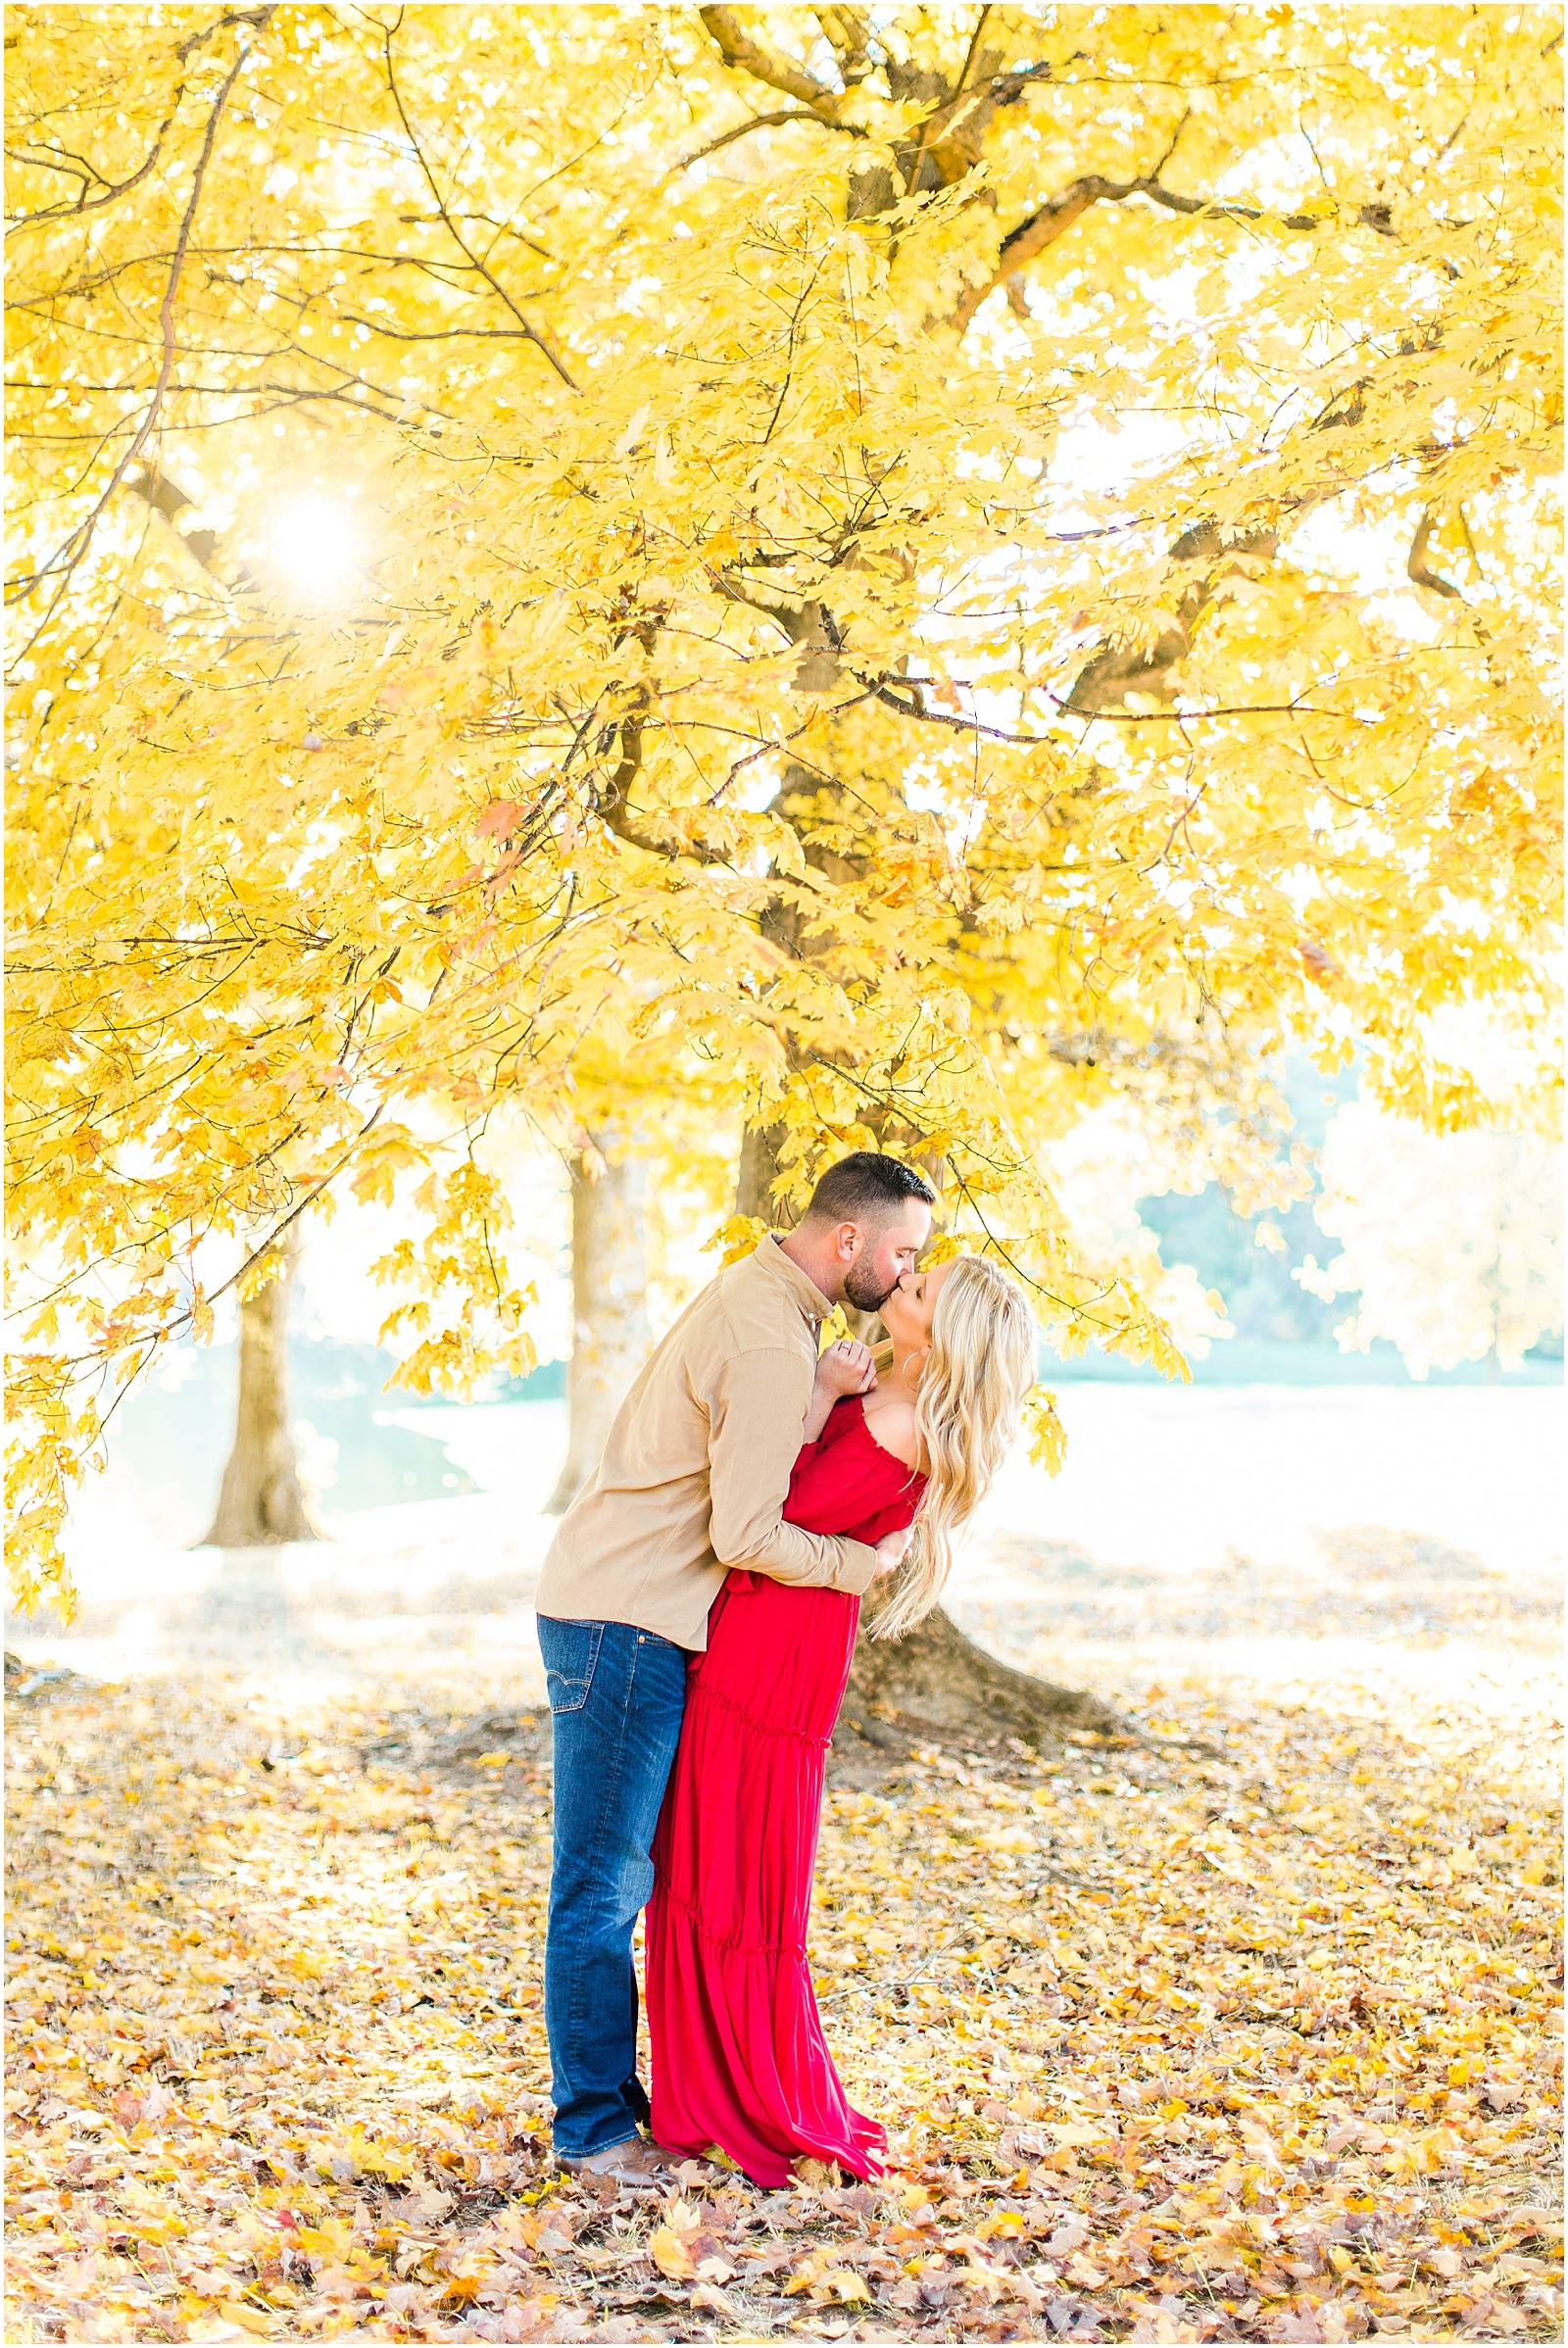 A Southern Indiana Engagement Session | Charleston and Erin | Bret and Brandie Photography034.jpg